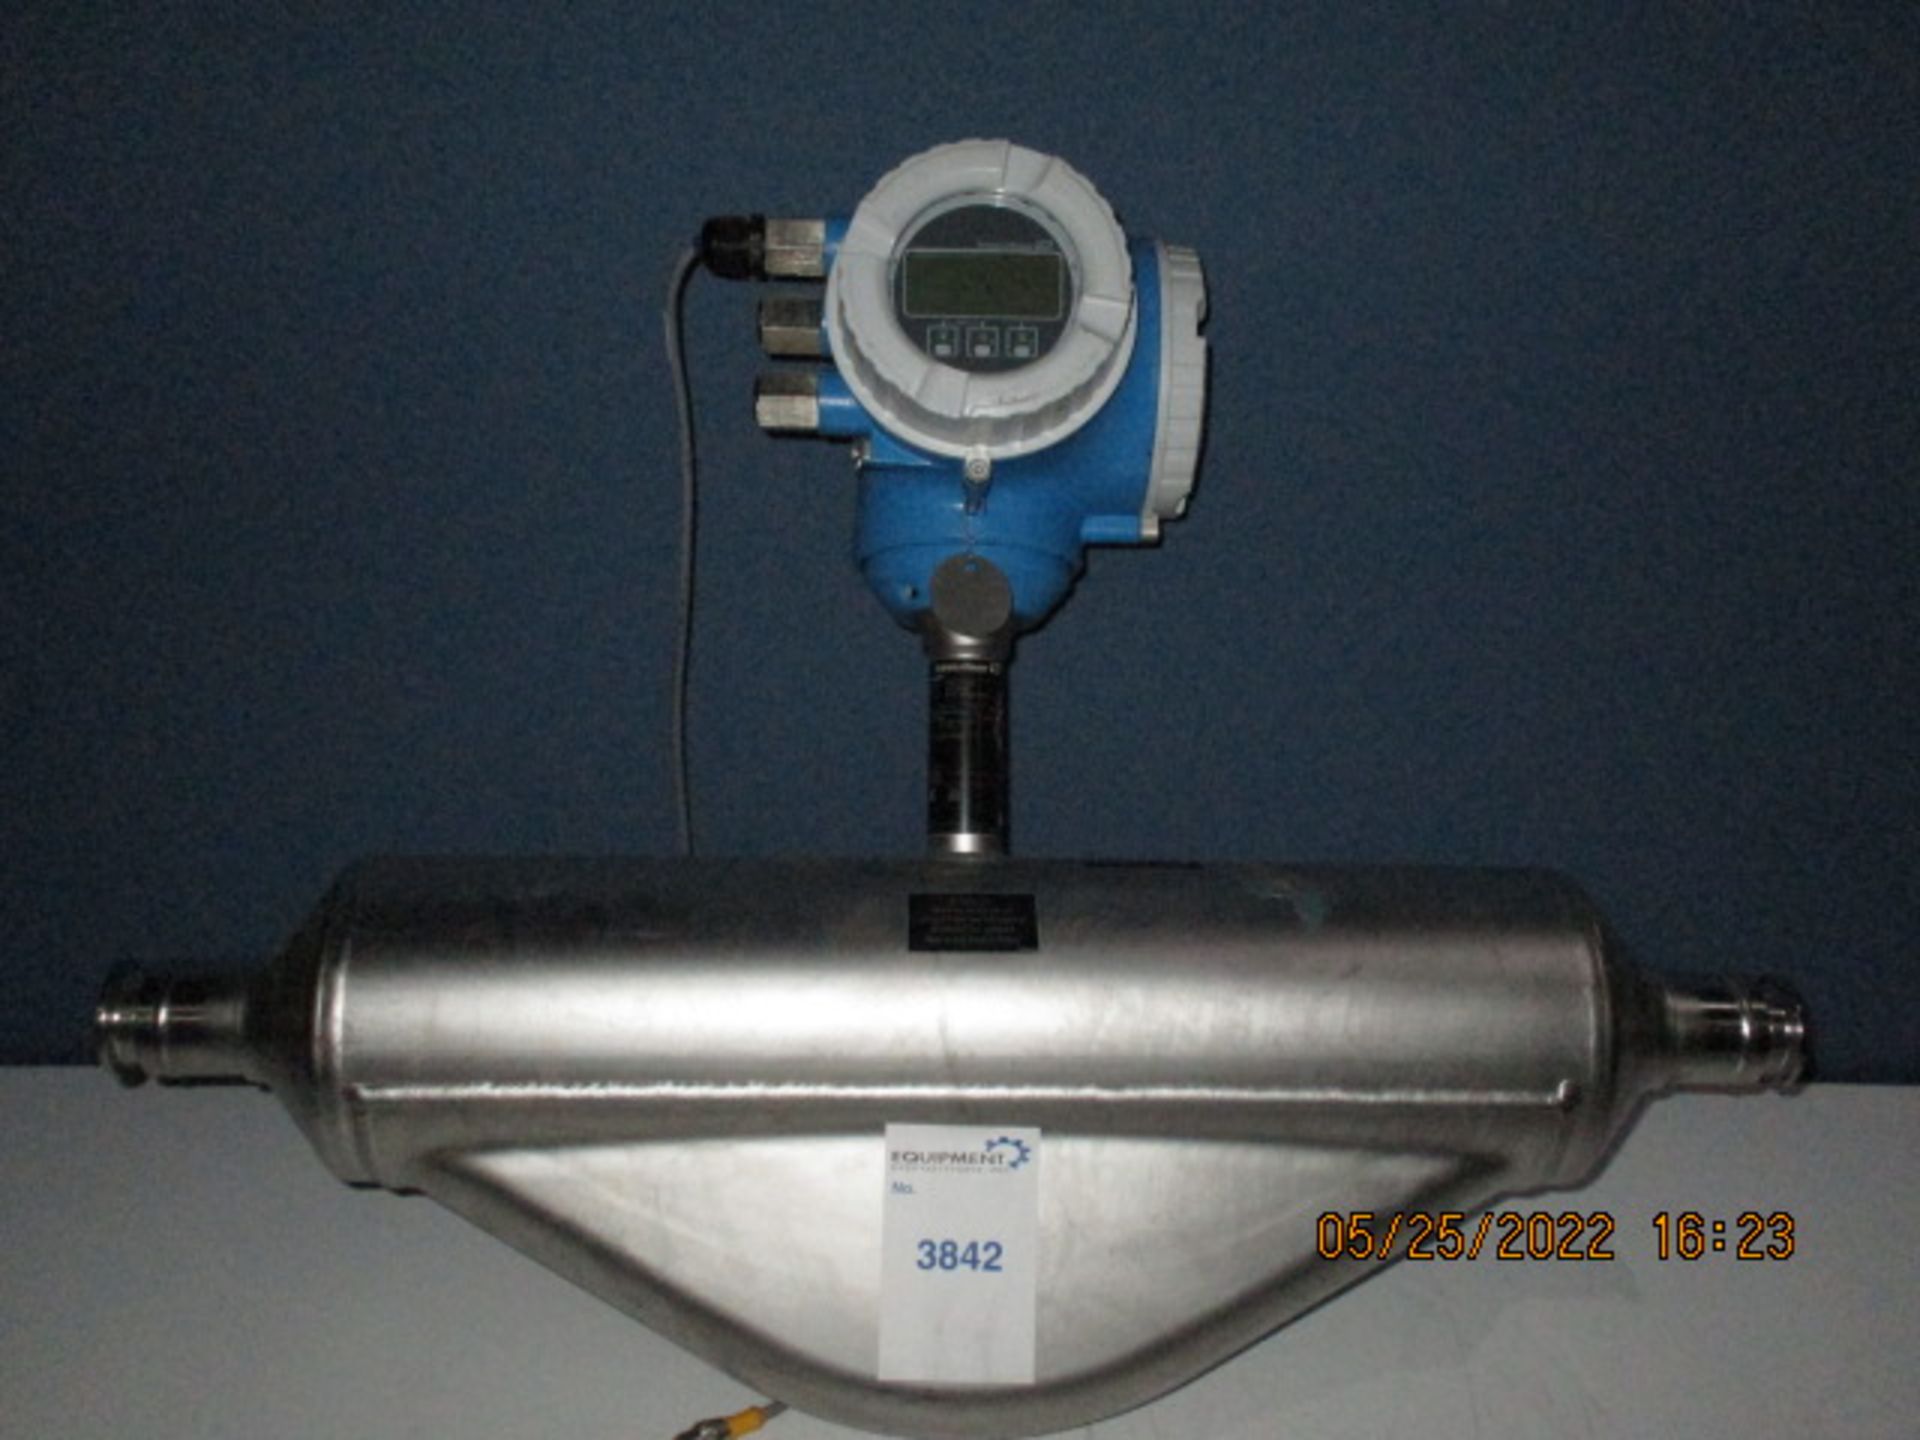 ENDRESS + HAUSER PROMASS 300 FLOW METER W PROMASS P SIZE DN40 / 1-1/2" - Image 4 of 8